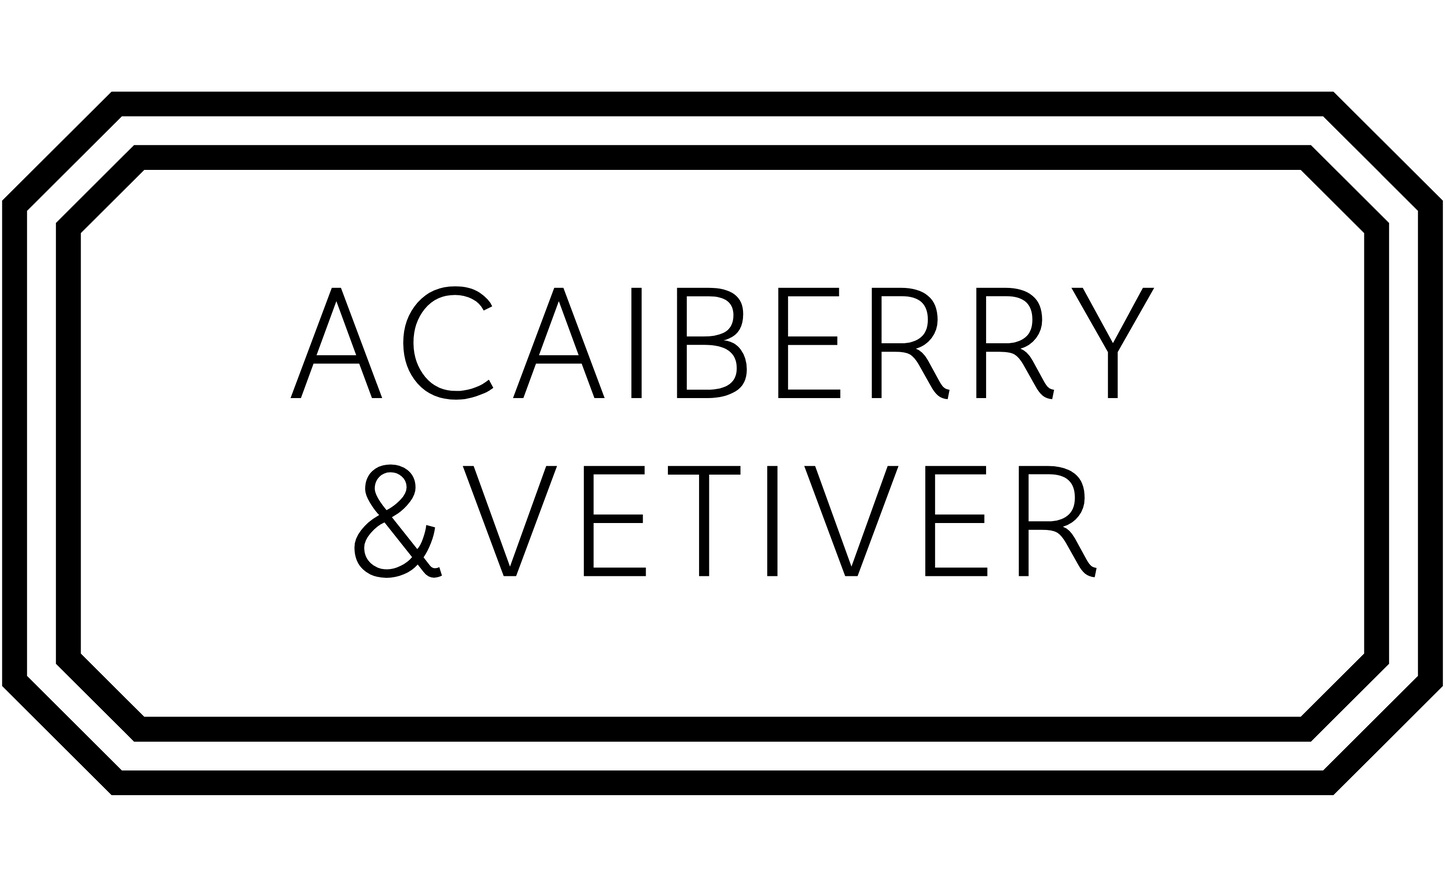 Just the candle - Acaiberry and Vetiver